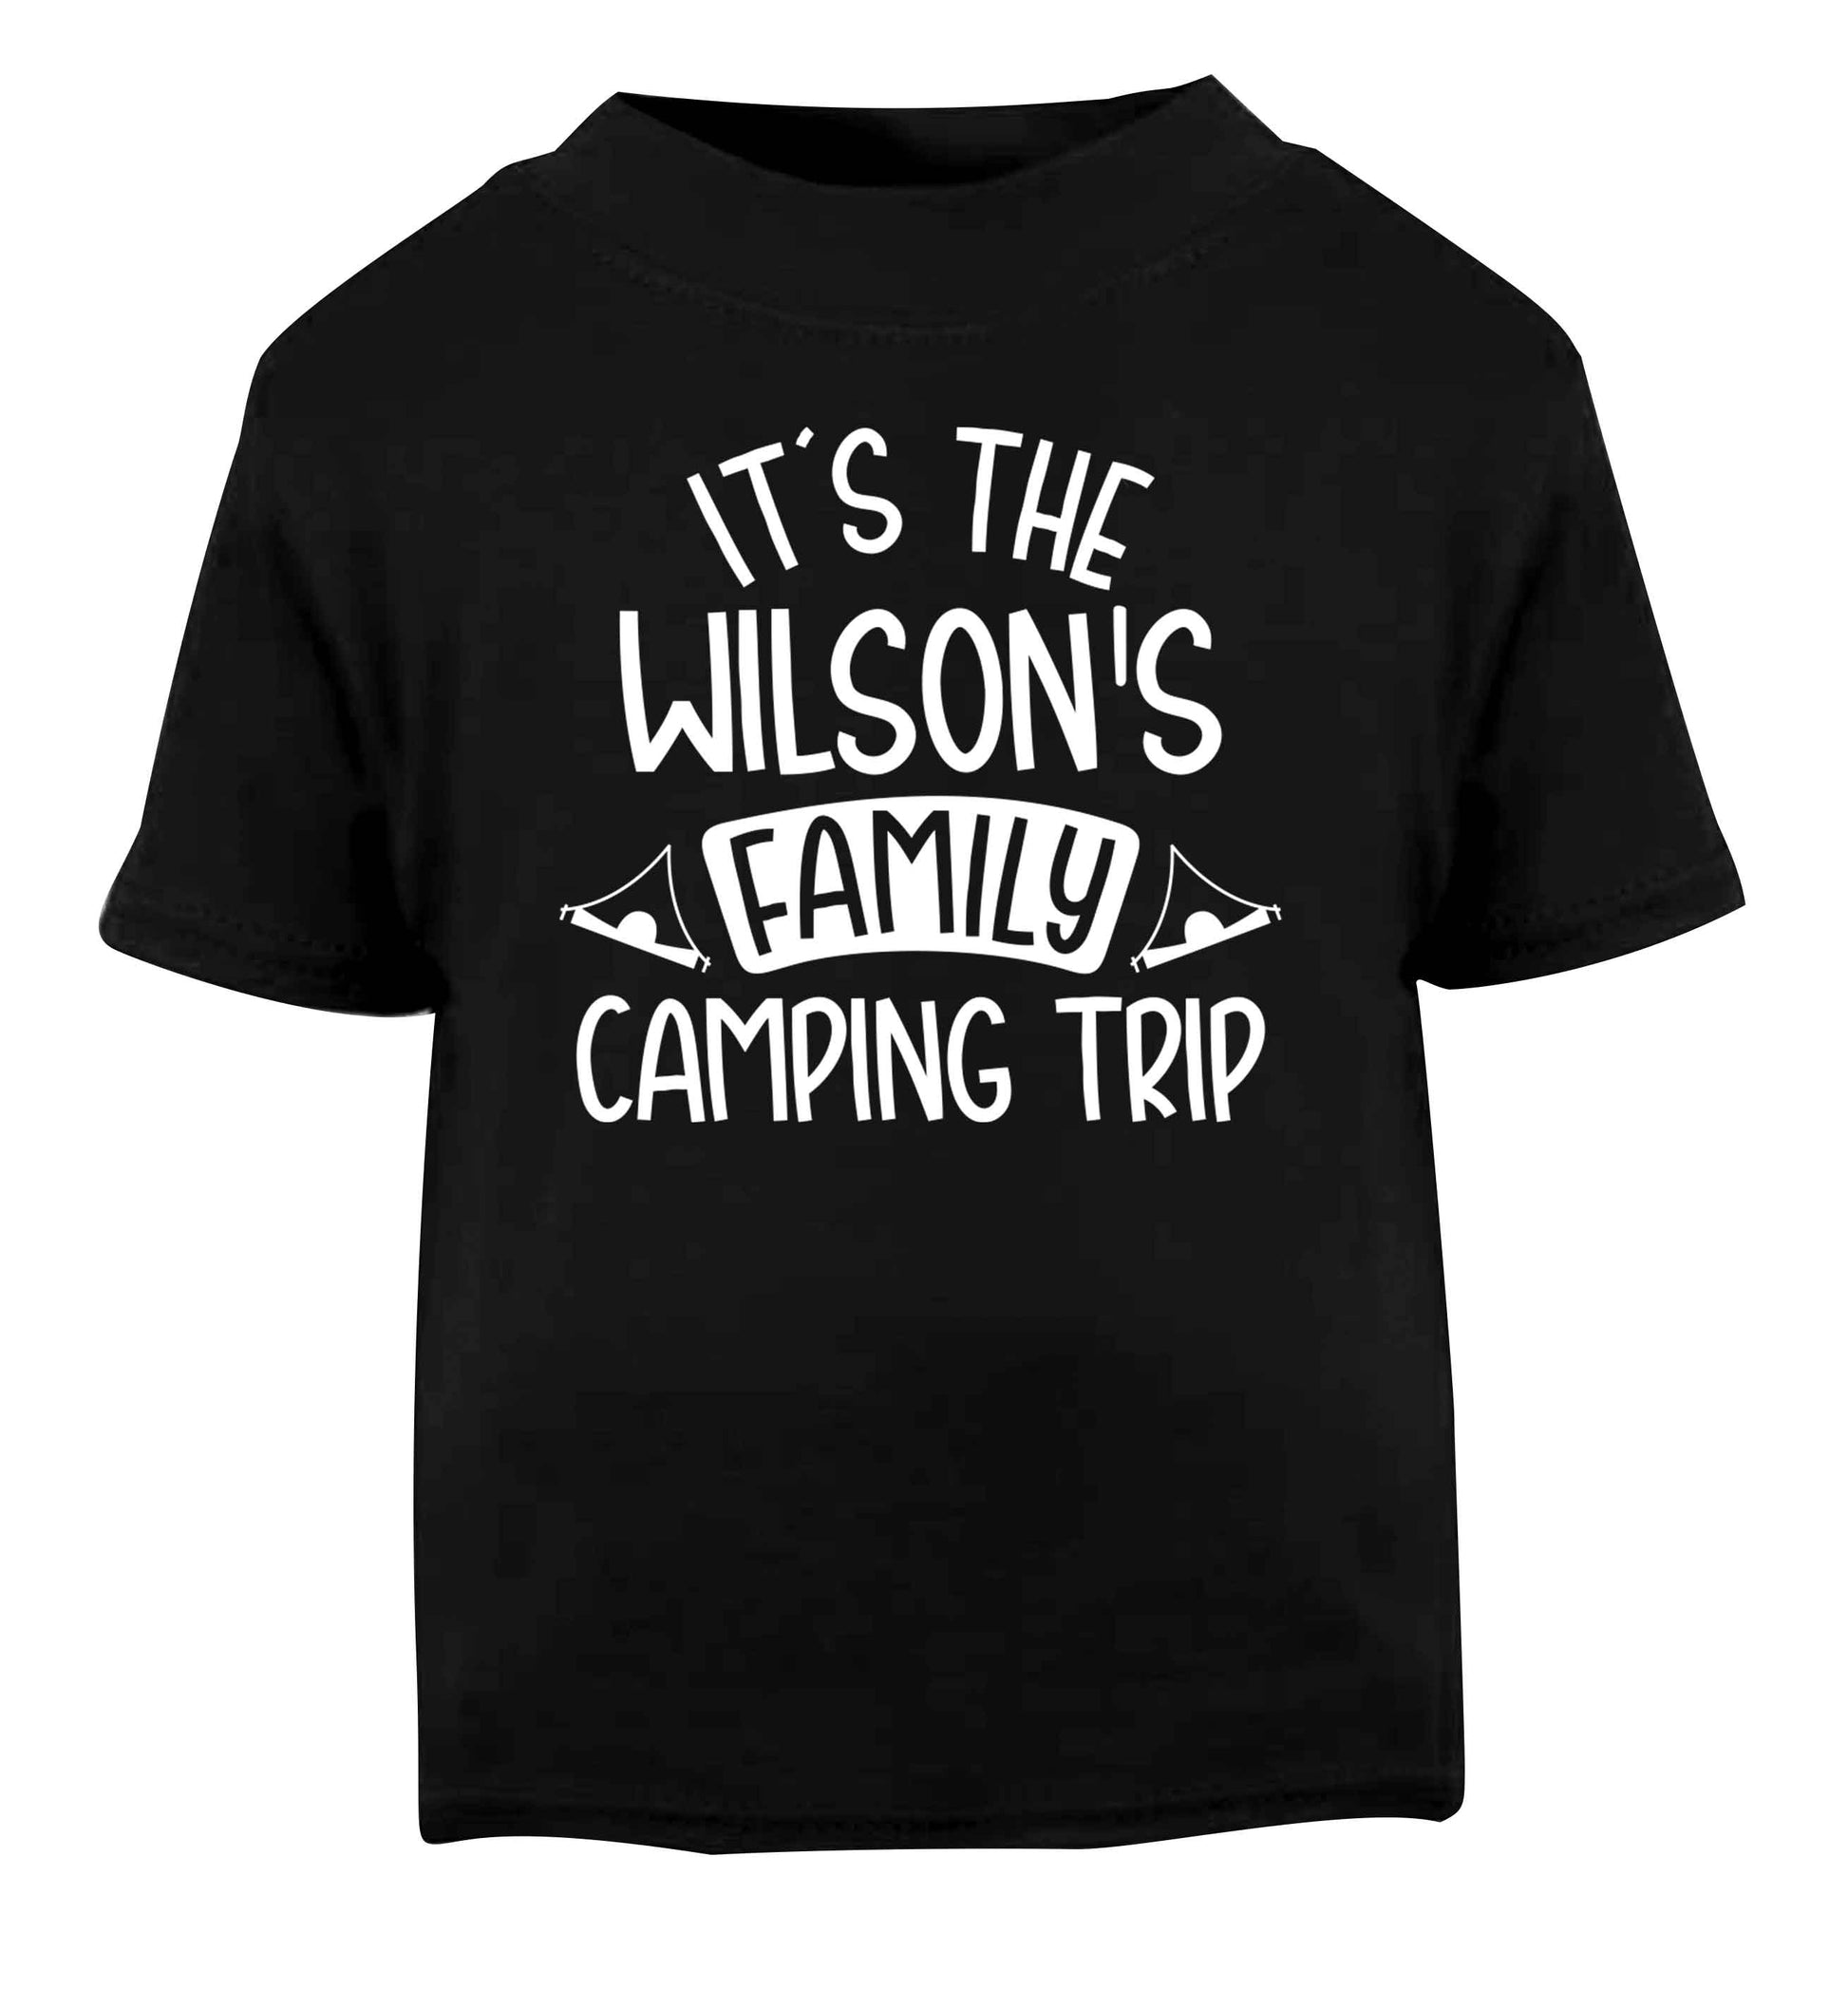 It's the Wilson's family camping trip personalised Black Baby Toddler Tshirt 2 years